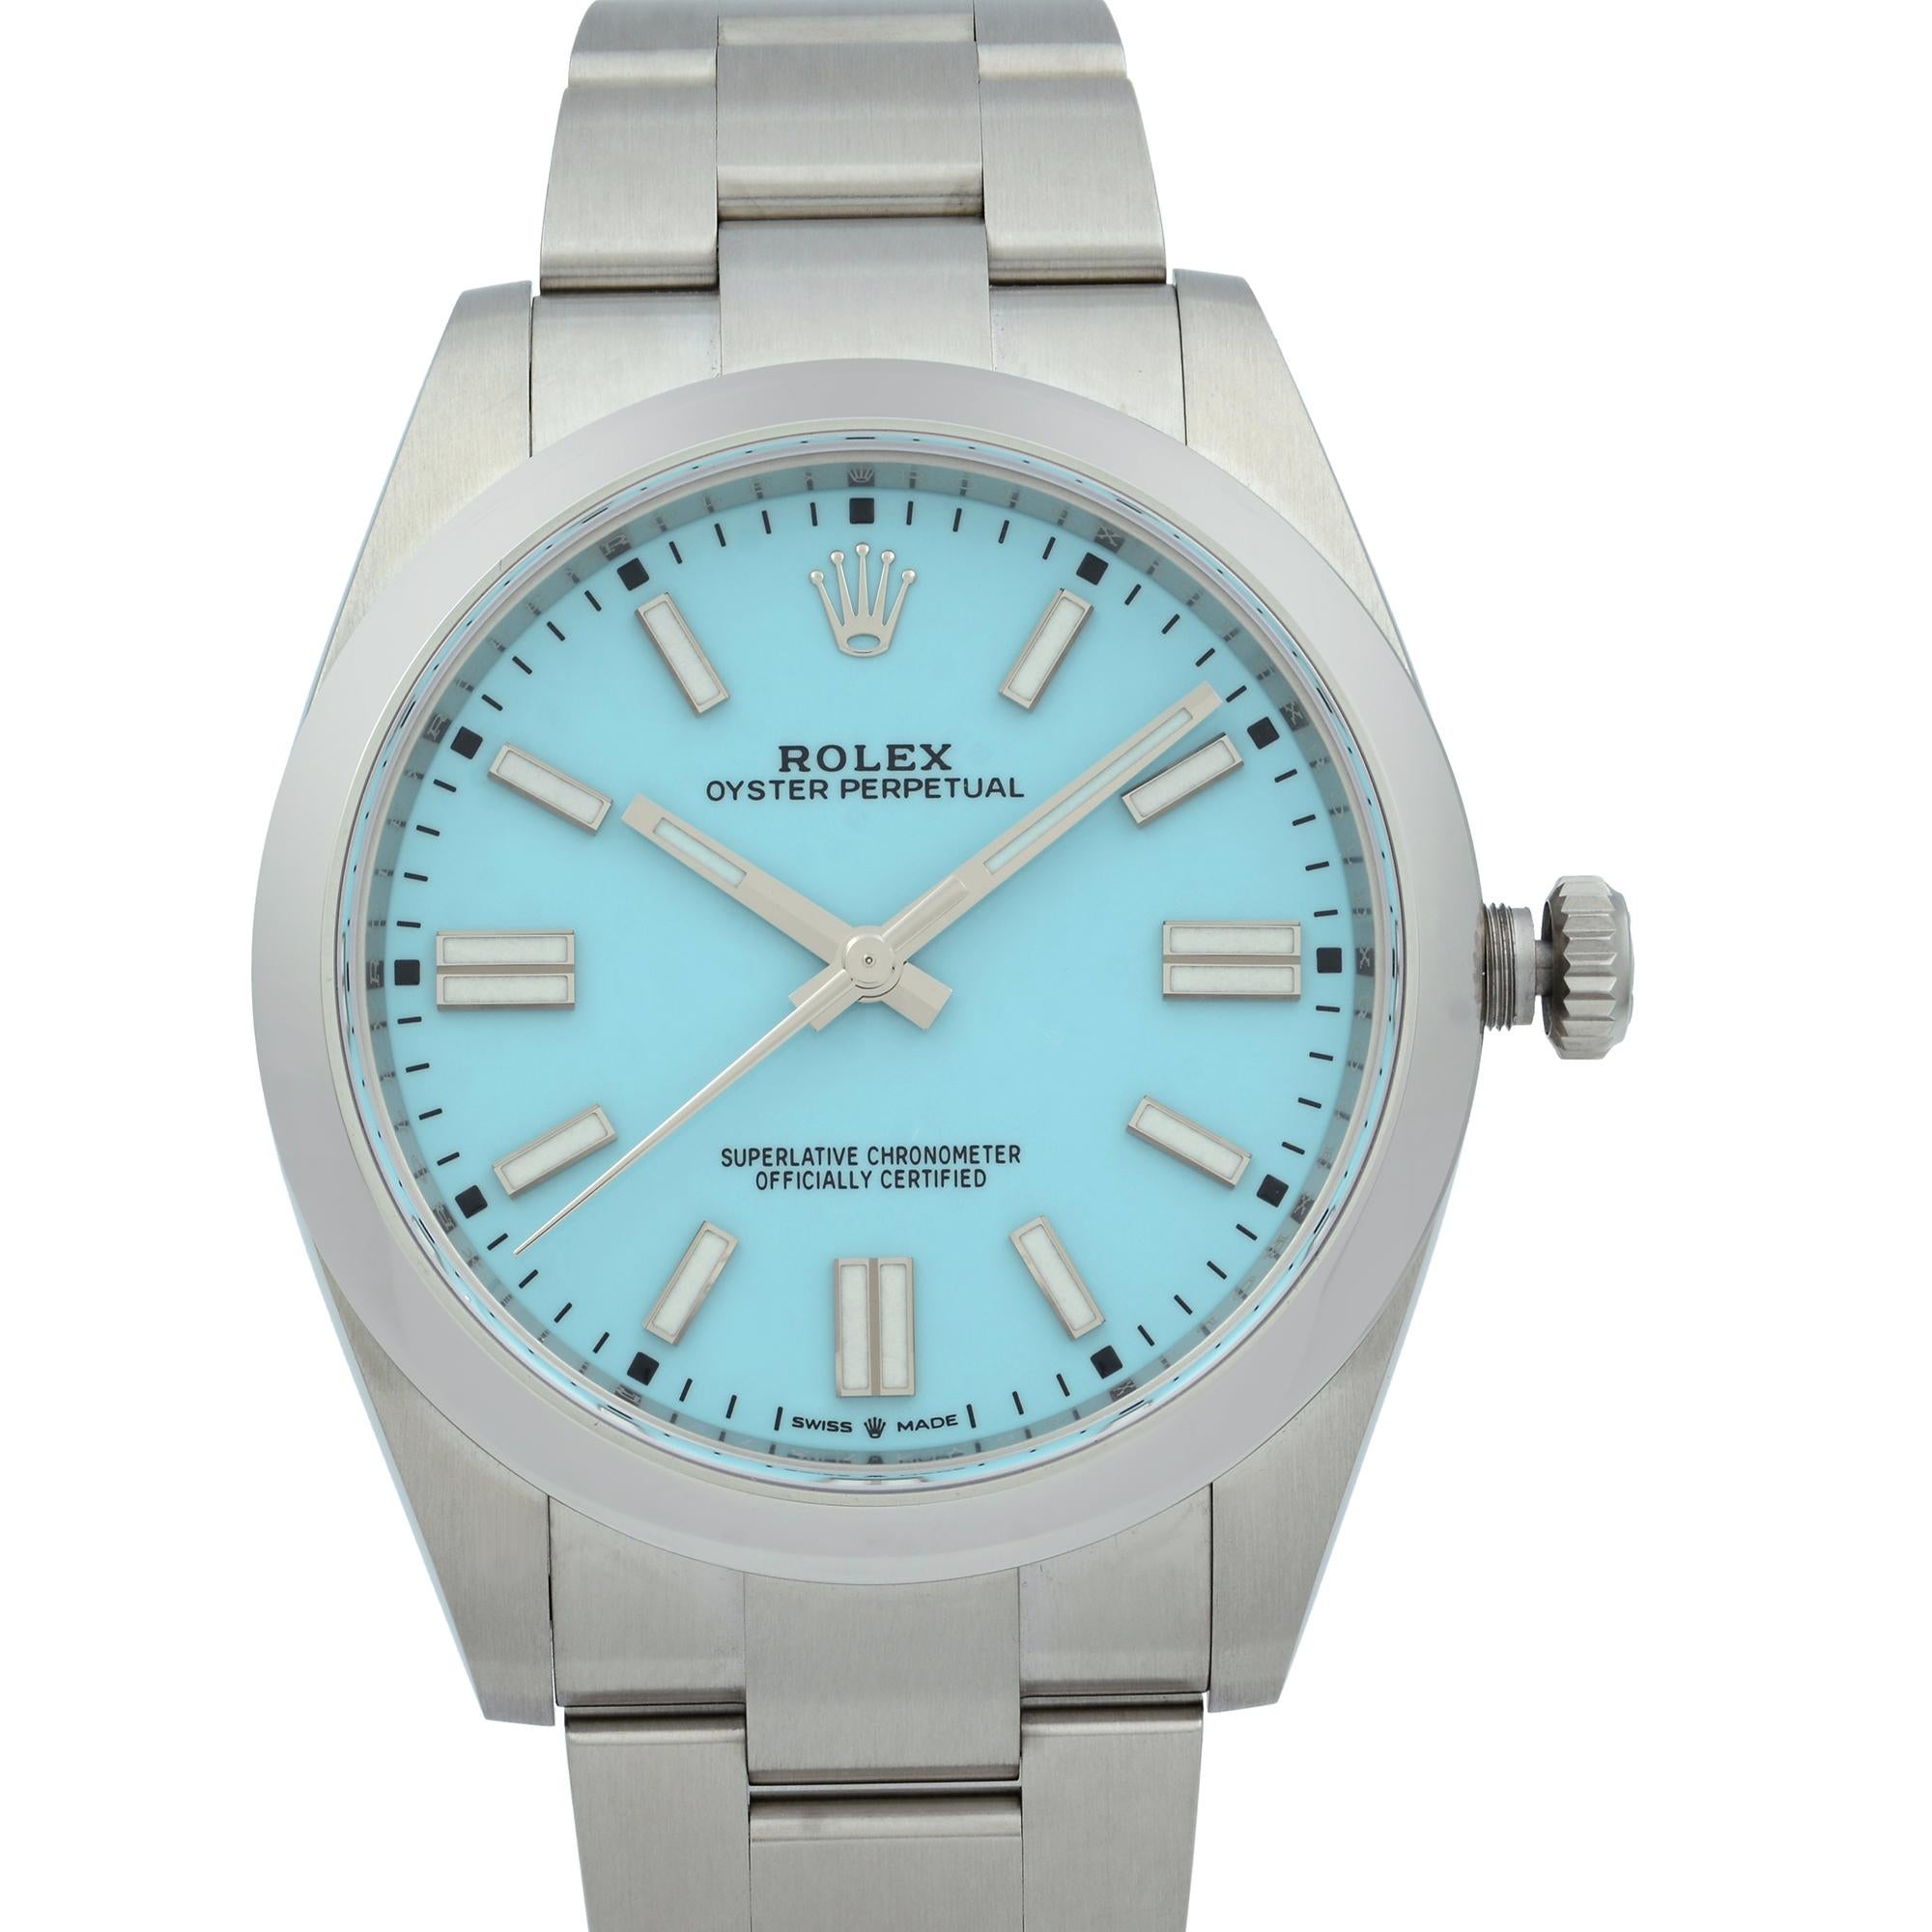 Unworn  Rolex  Oyster Perpetual 124300 41mm Stainless Steel Men's Watch. Tiffany Turquoise Blue Dial. New Style Green Card. Comes with the Original Box and Papers. Covered By 3-Year Chronostore Warranty.
Details:
Brand Rolex
Department Men
Model